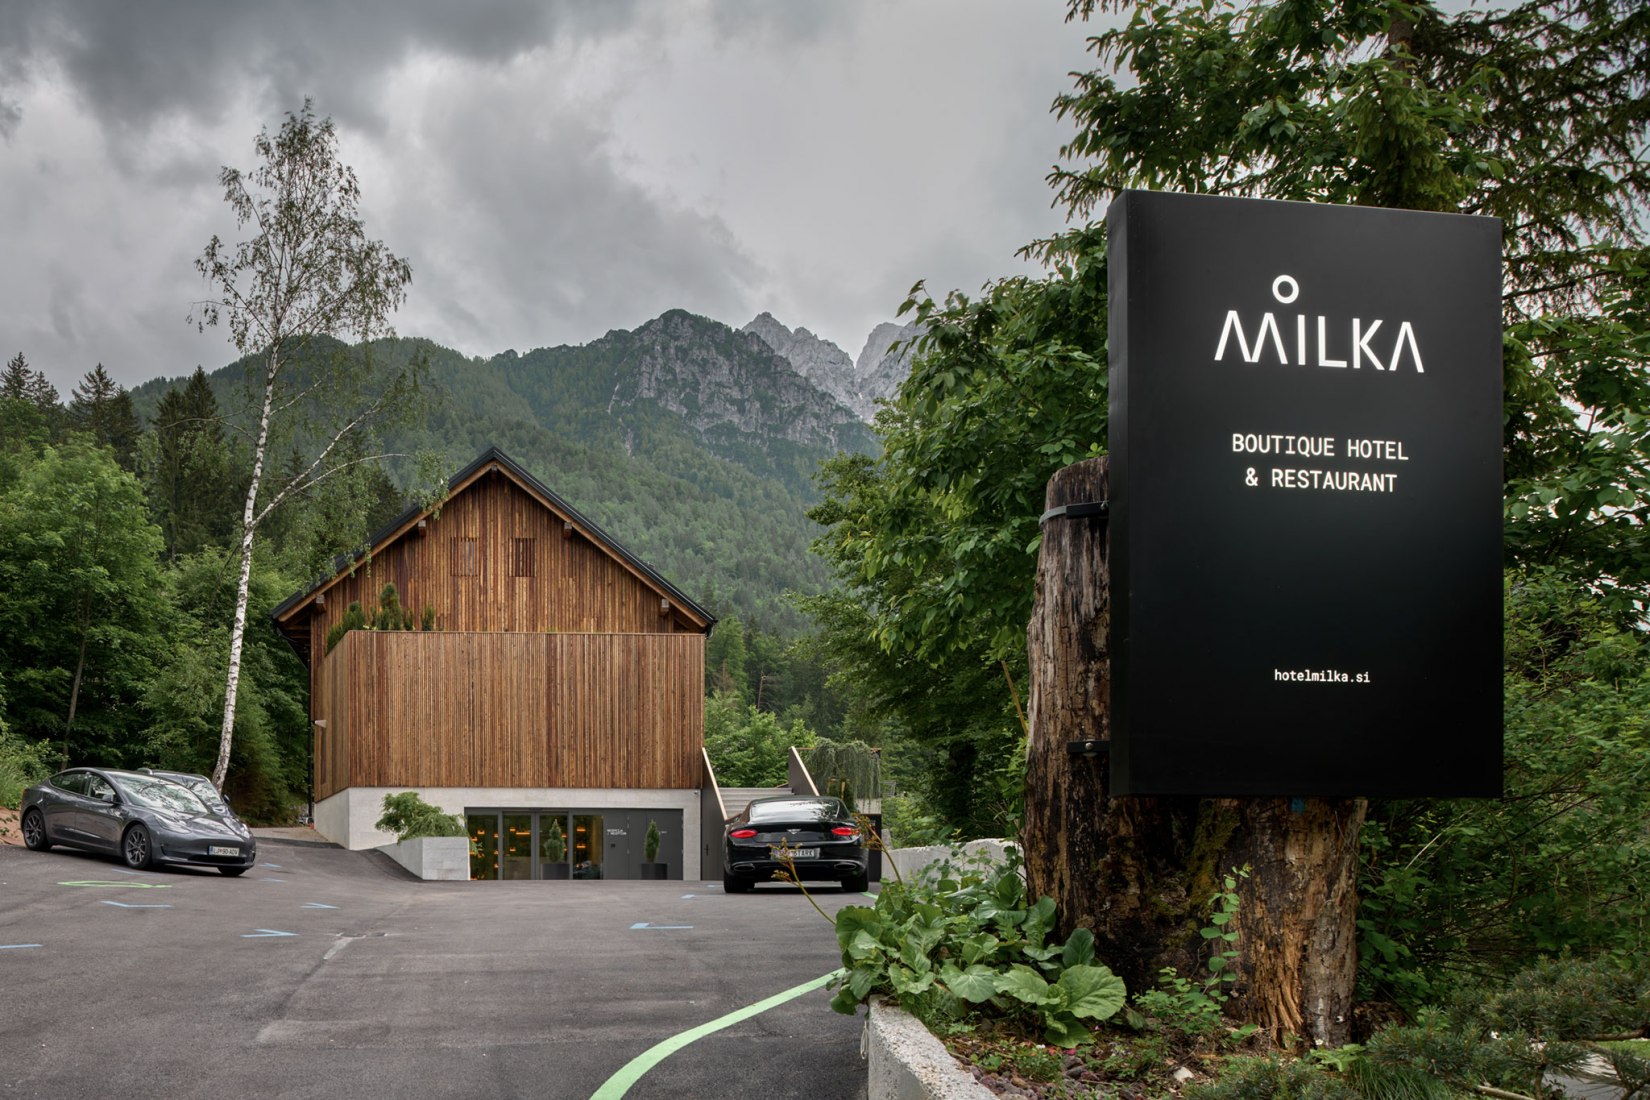 Milka Boutique Hotel and Restaurant by Gartner Architects. Photograph by Claudio Parada Nunes.